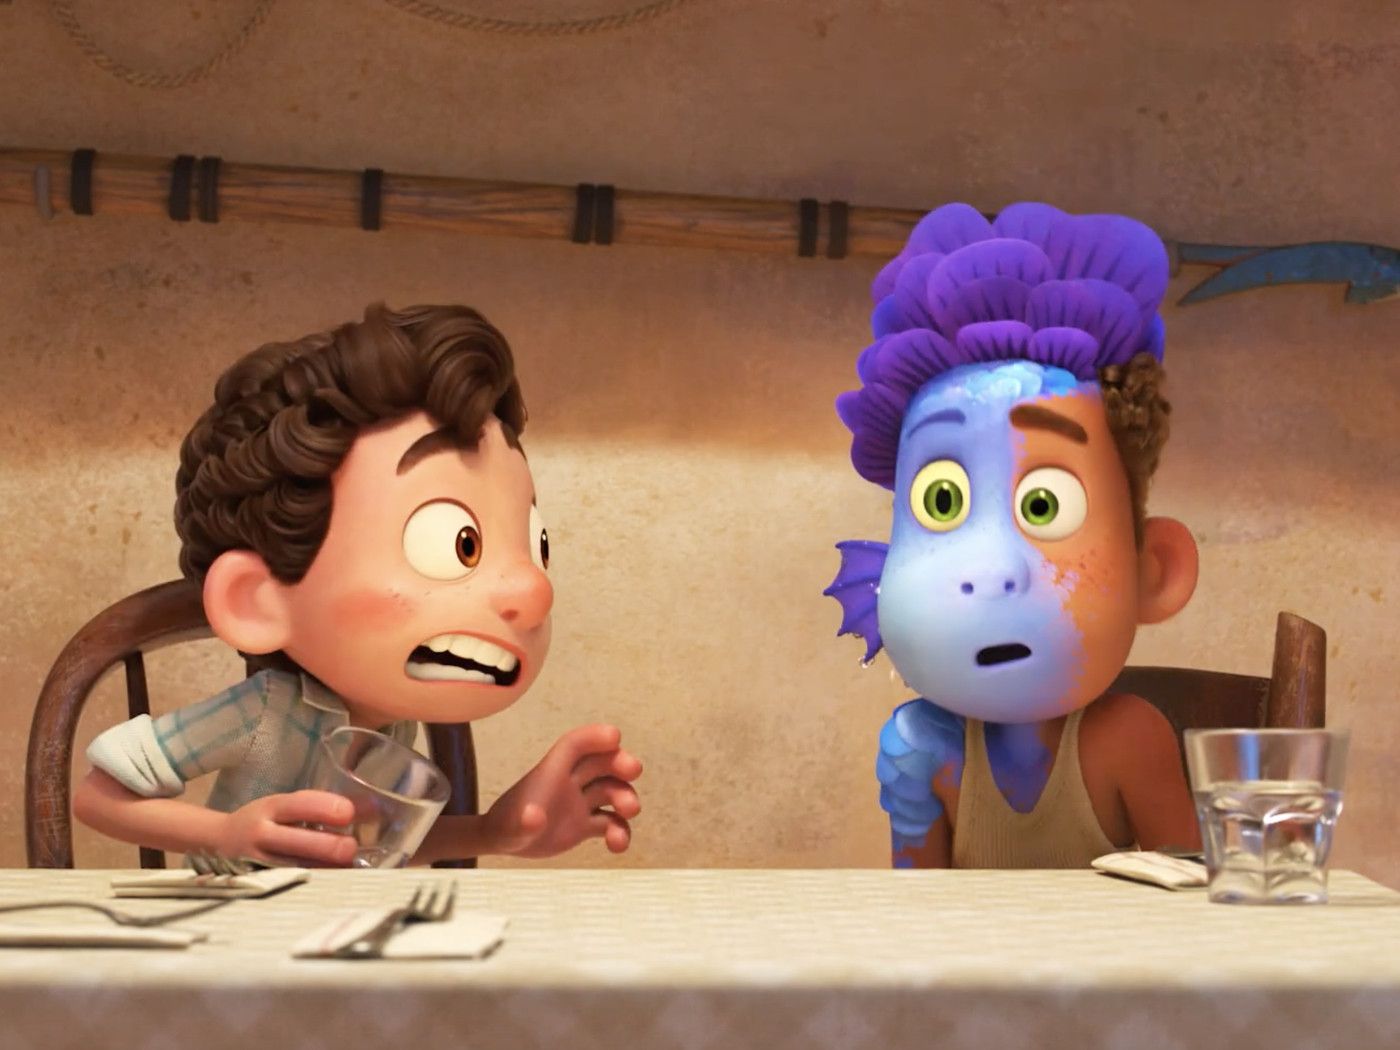 Luca trailer: Pixar's new movie has sea monsters and friendship